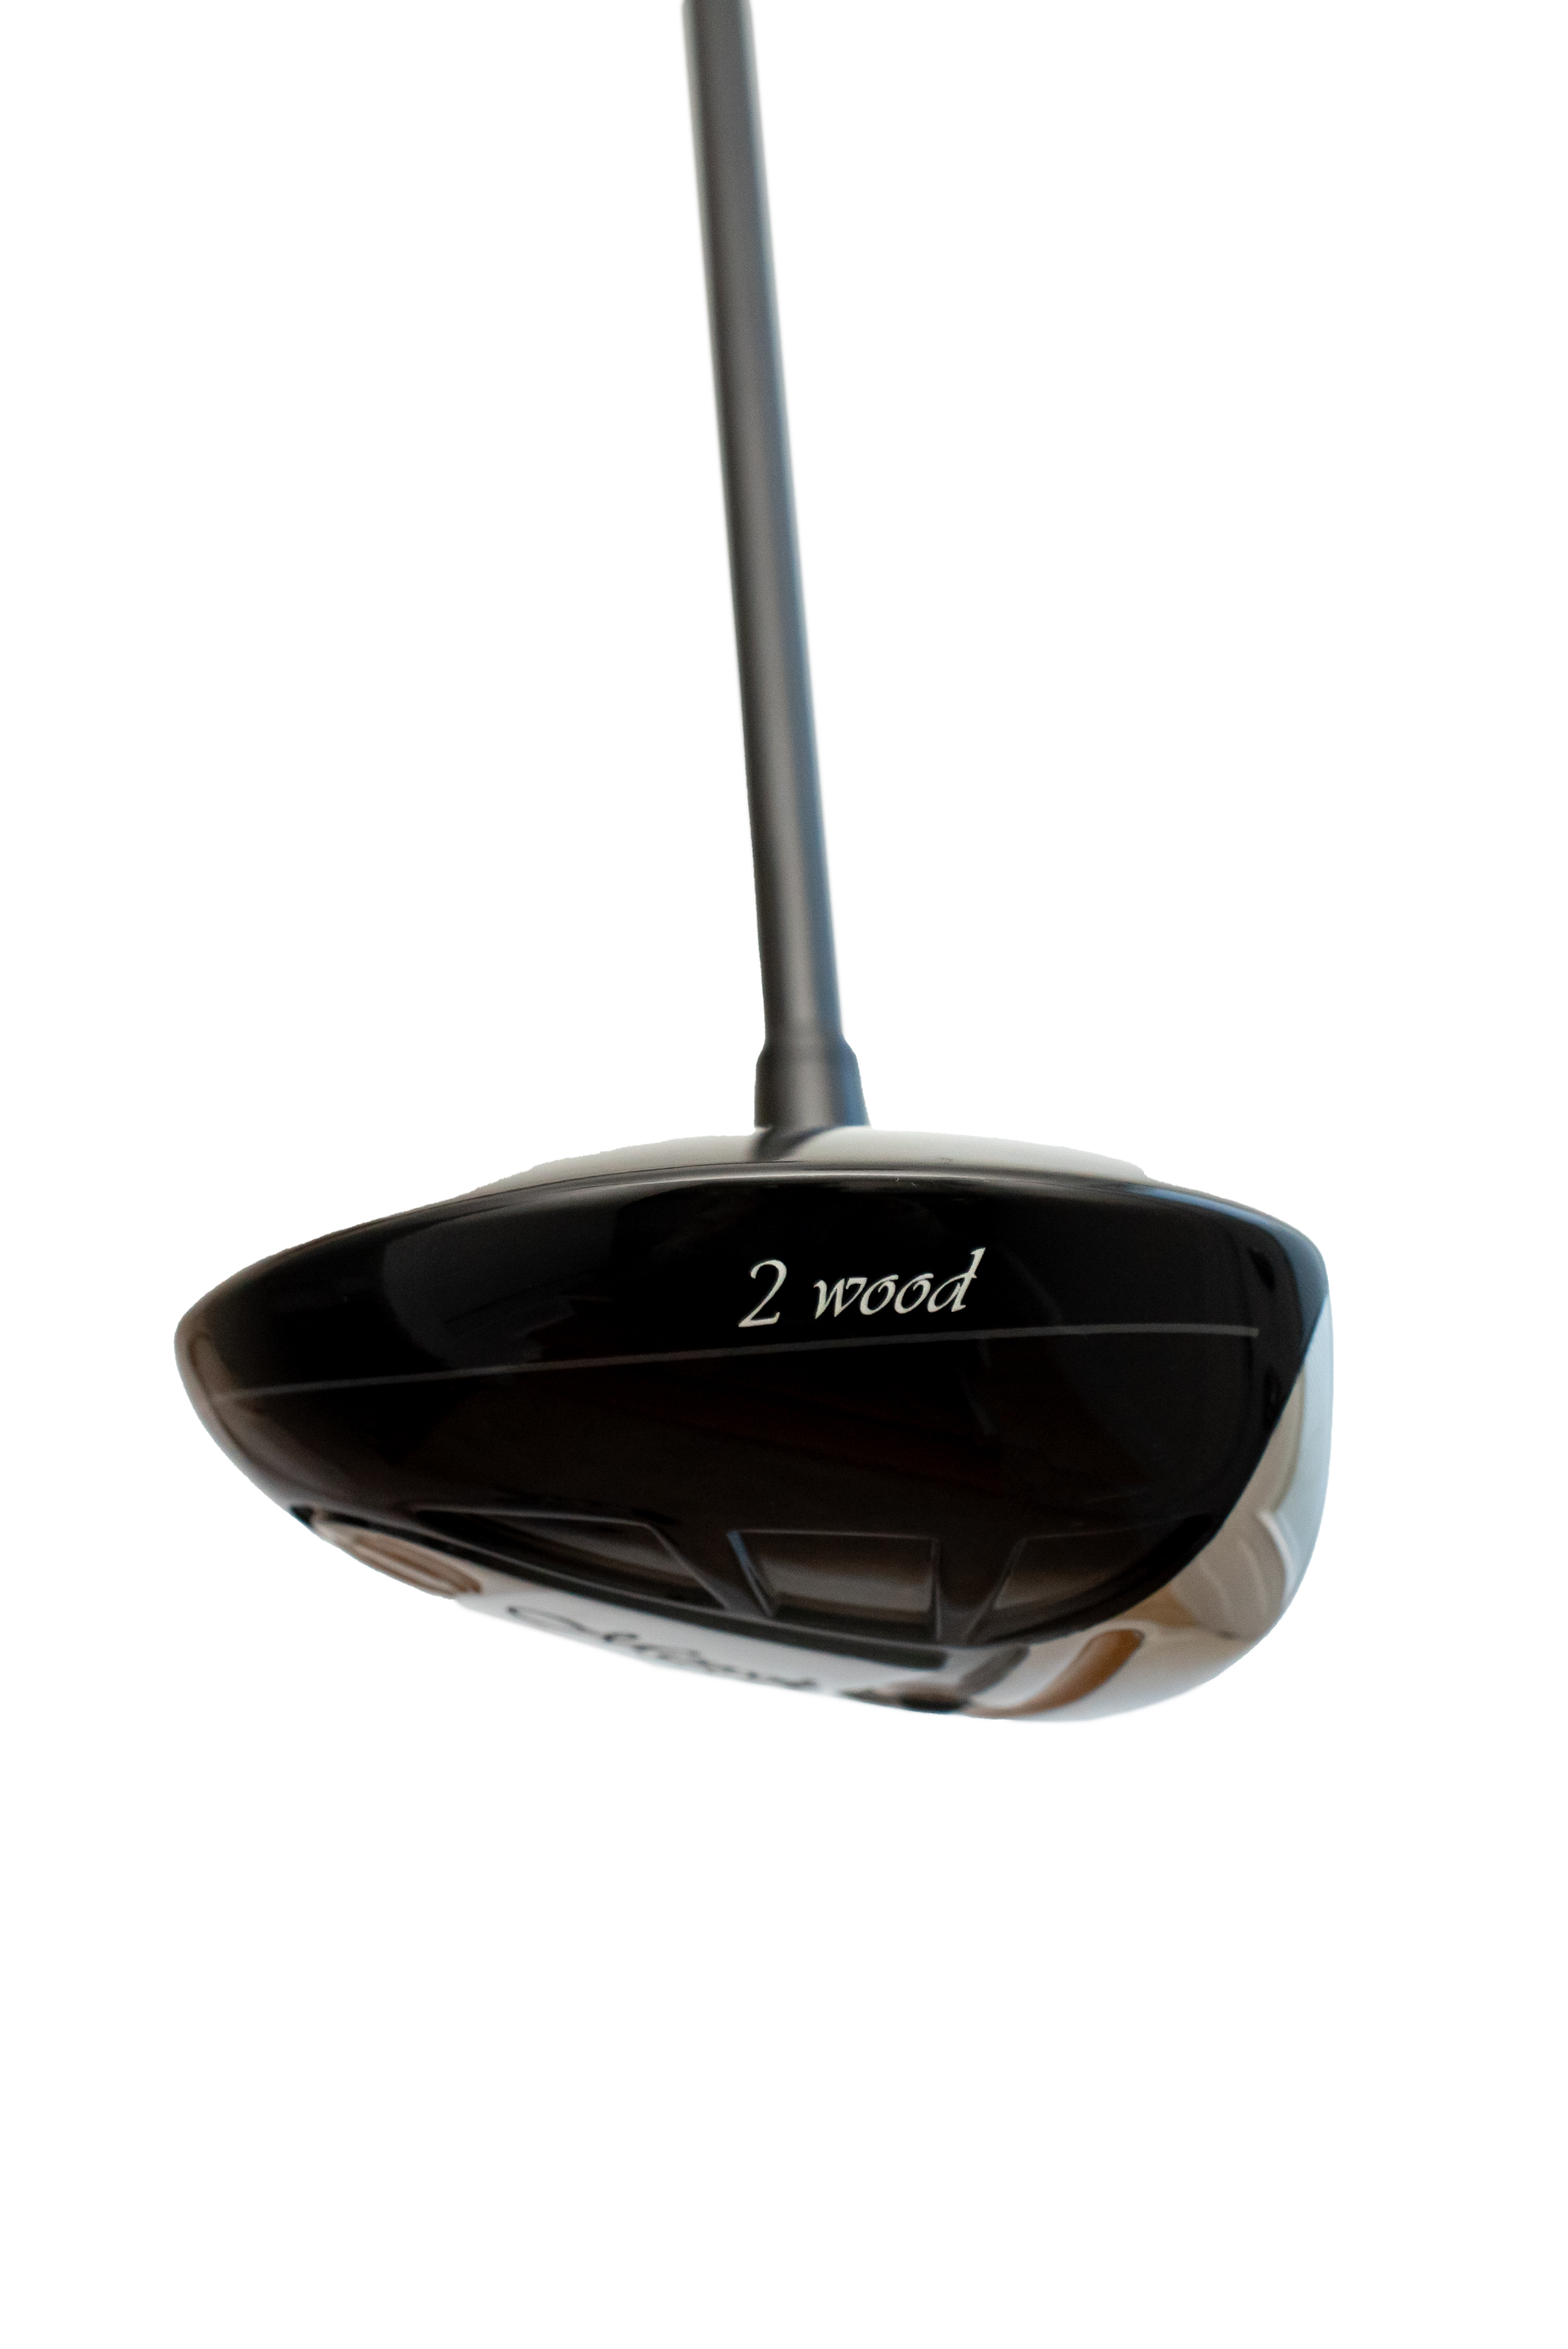 RIGHT Club Head ONLY  (no shaft)